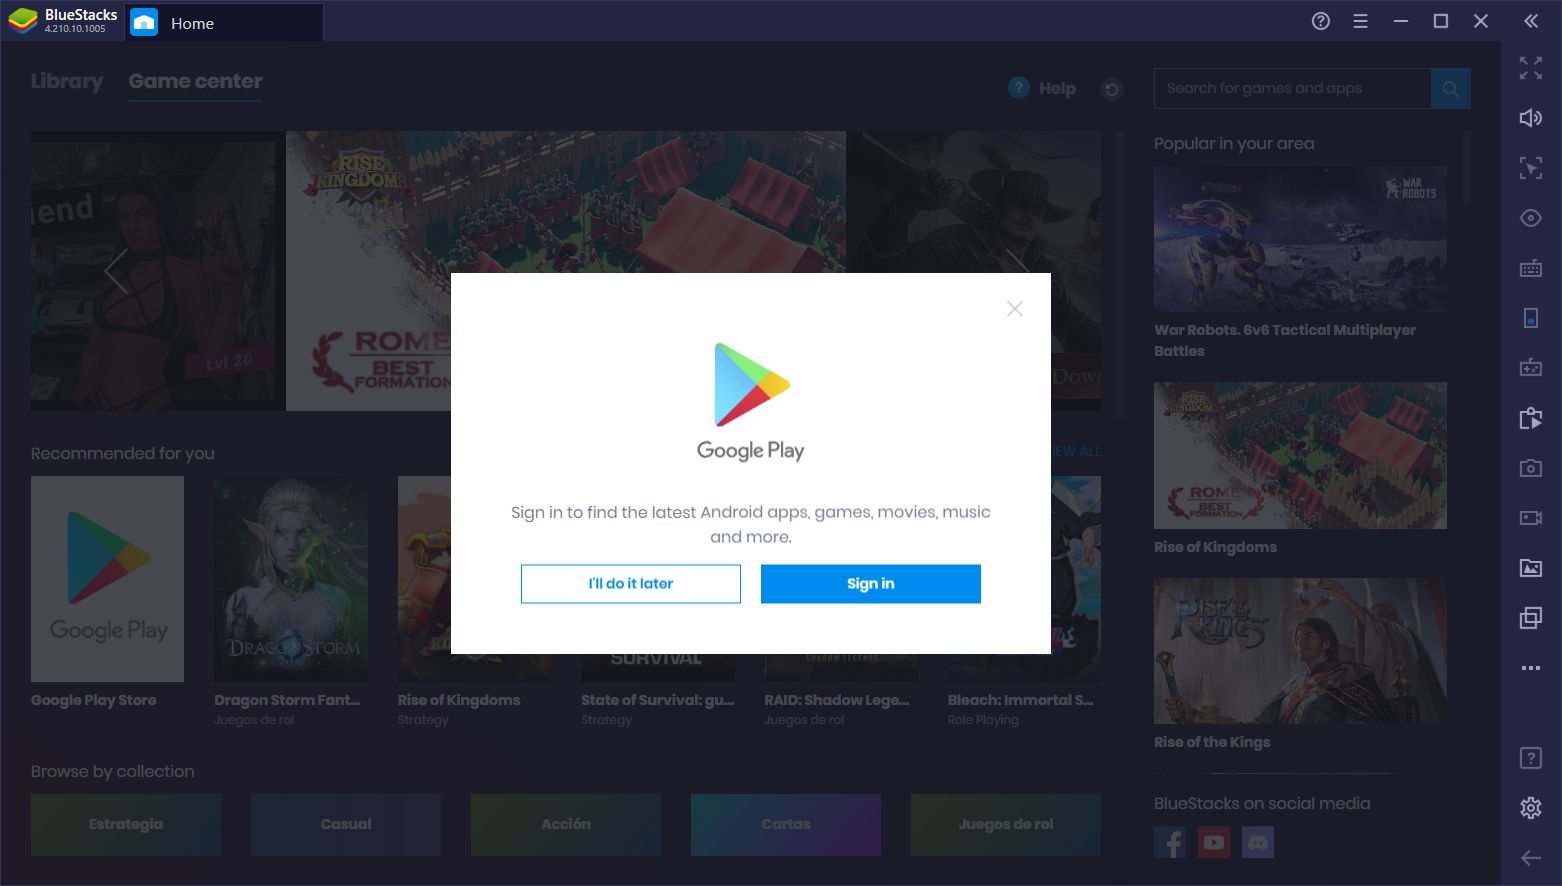 How to Download and Install BlueStacks 4, The Best Android Emulator in the Market